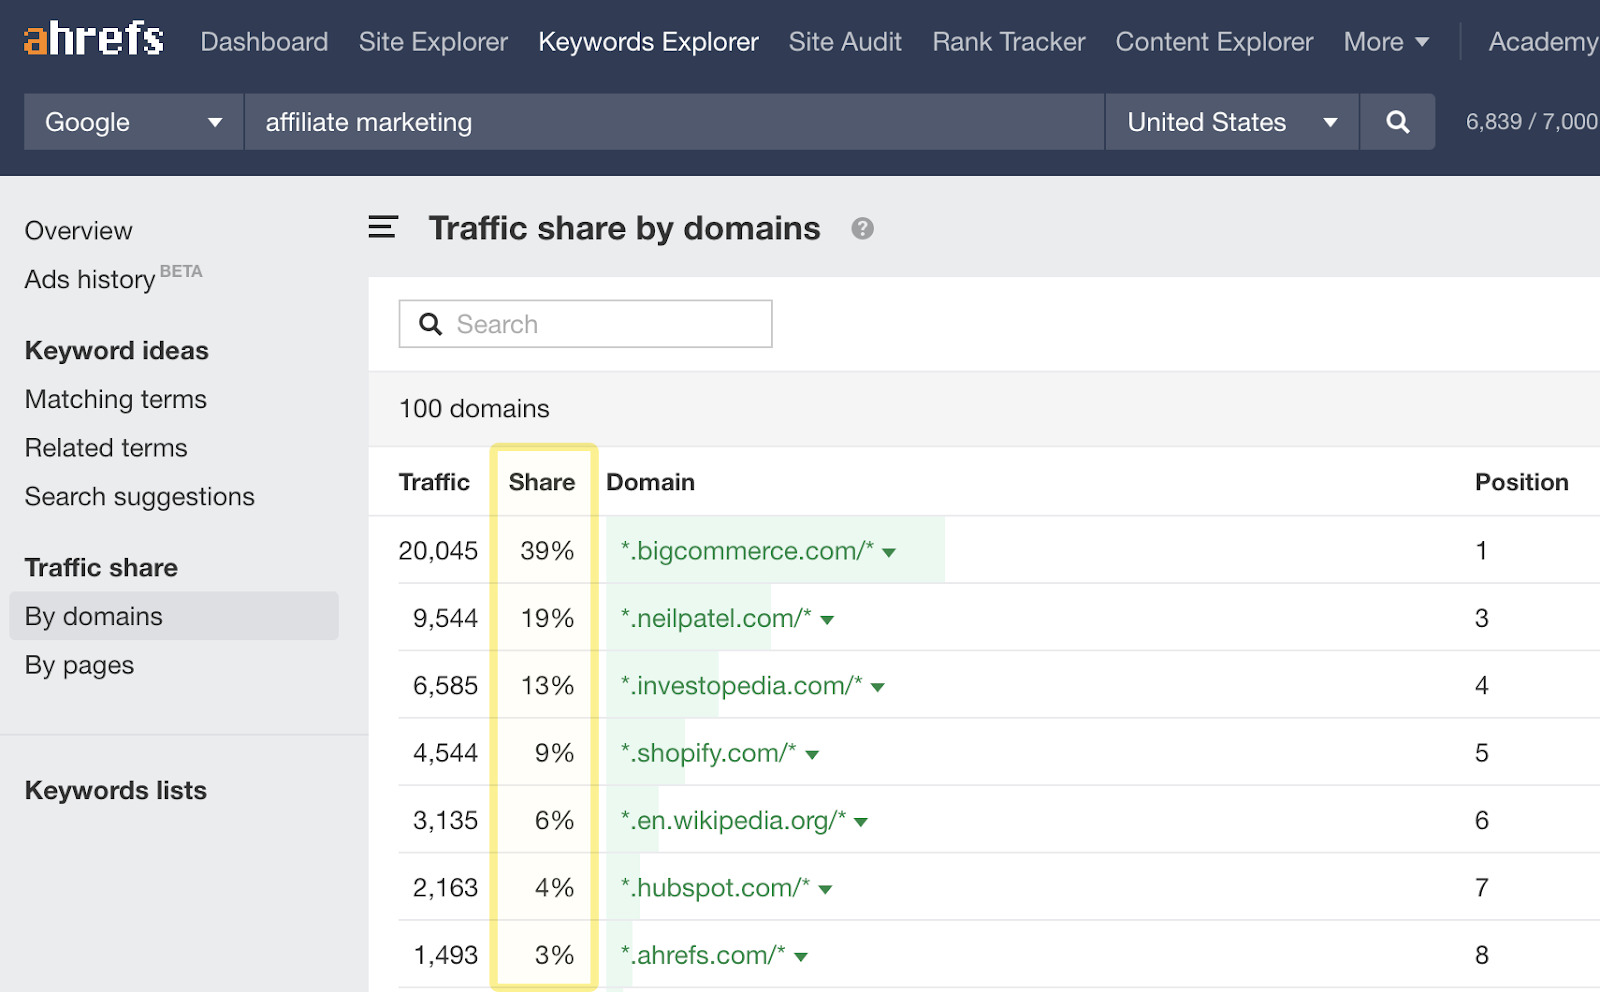 Traffic share by domains report